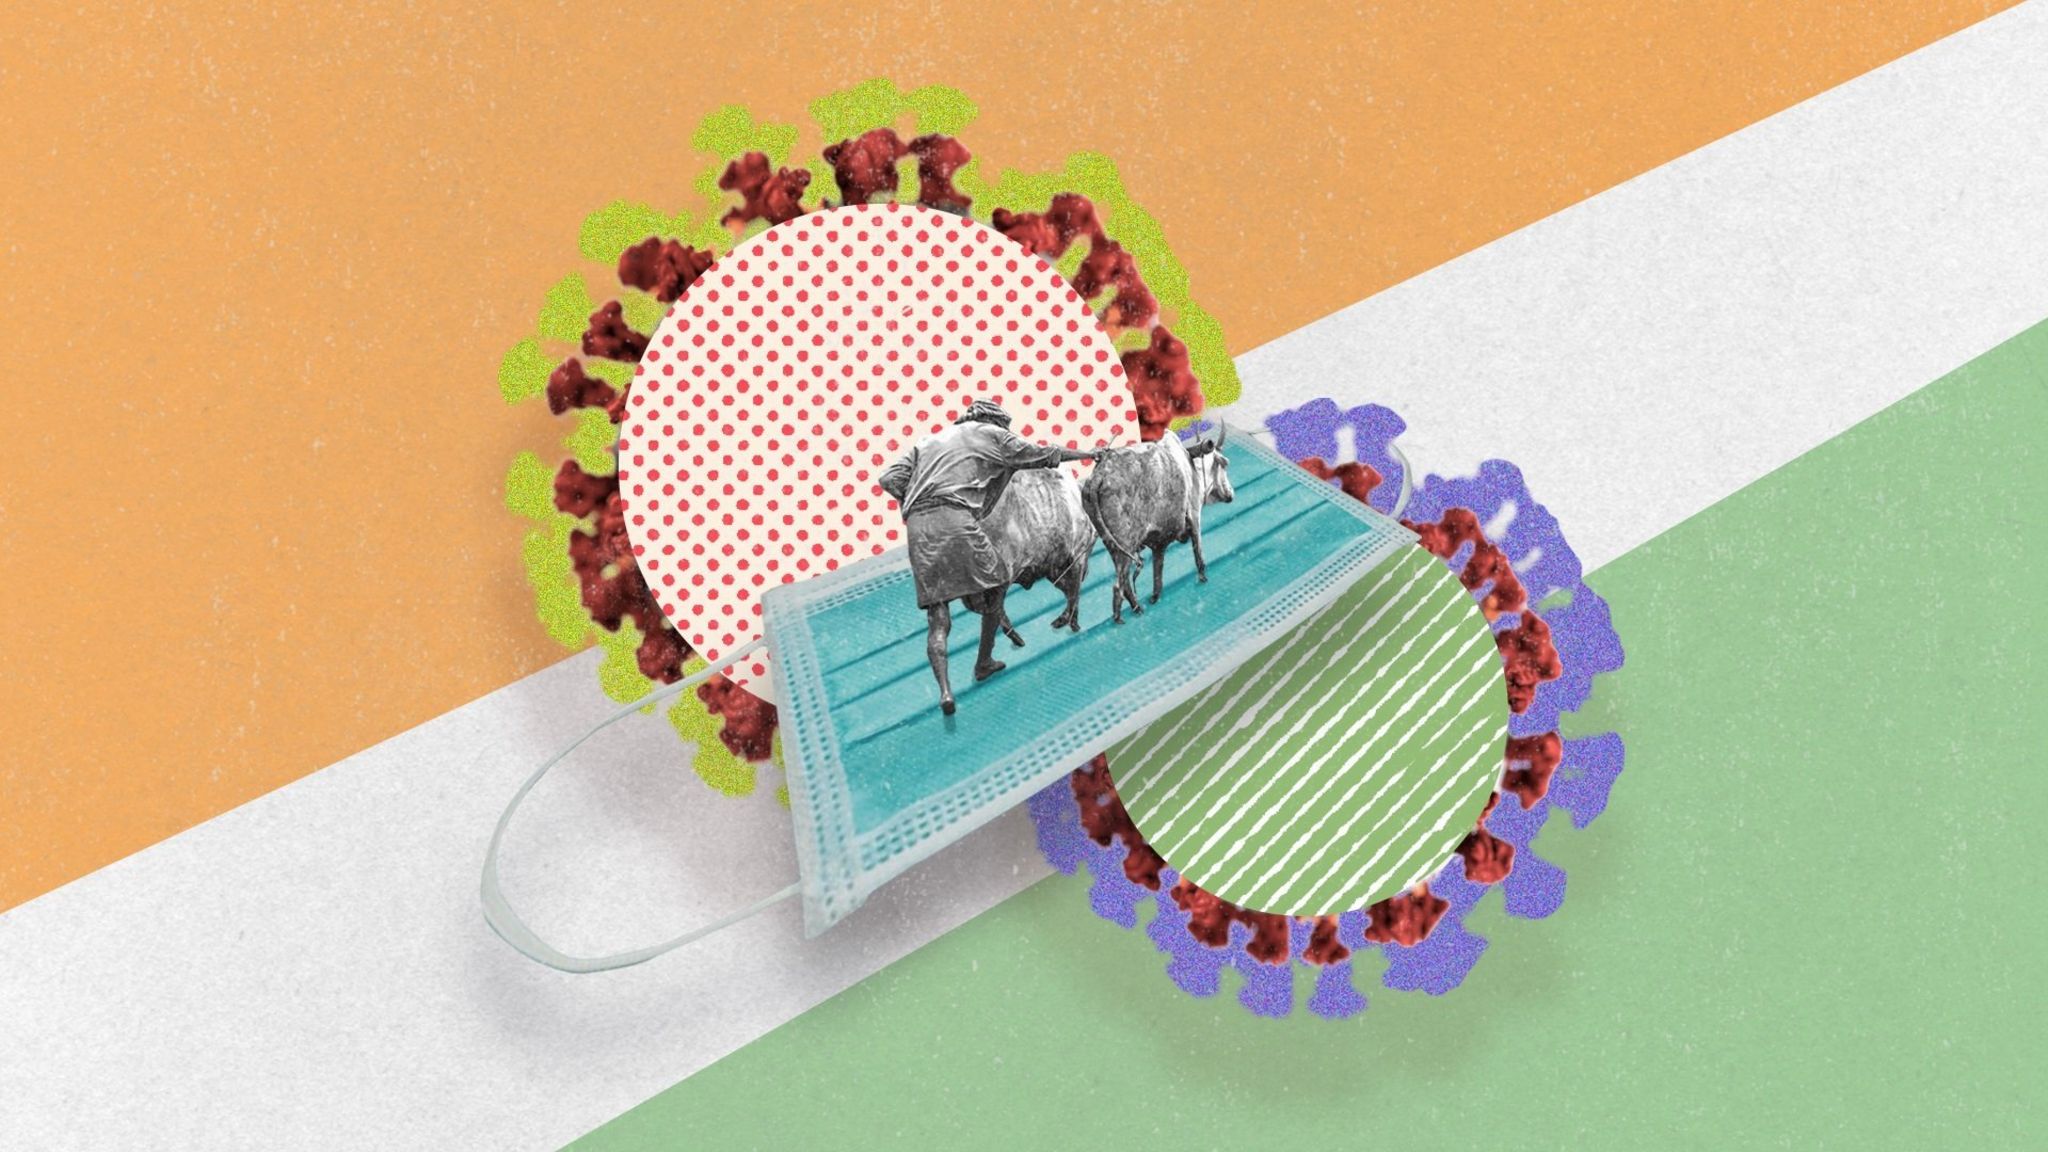 Collage art of a farmer with cattle standing on a large blue mask. Background is India's flag colours of orange, white and green.